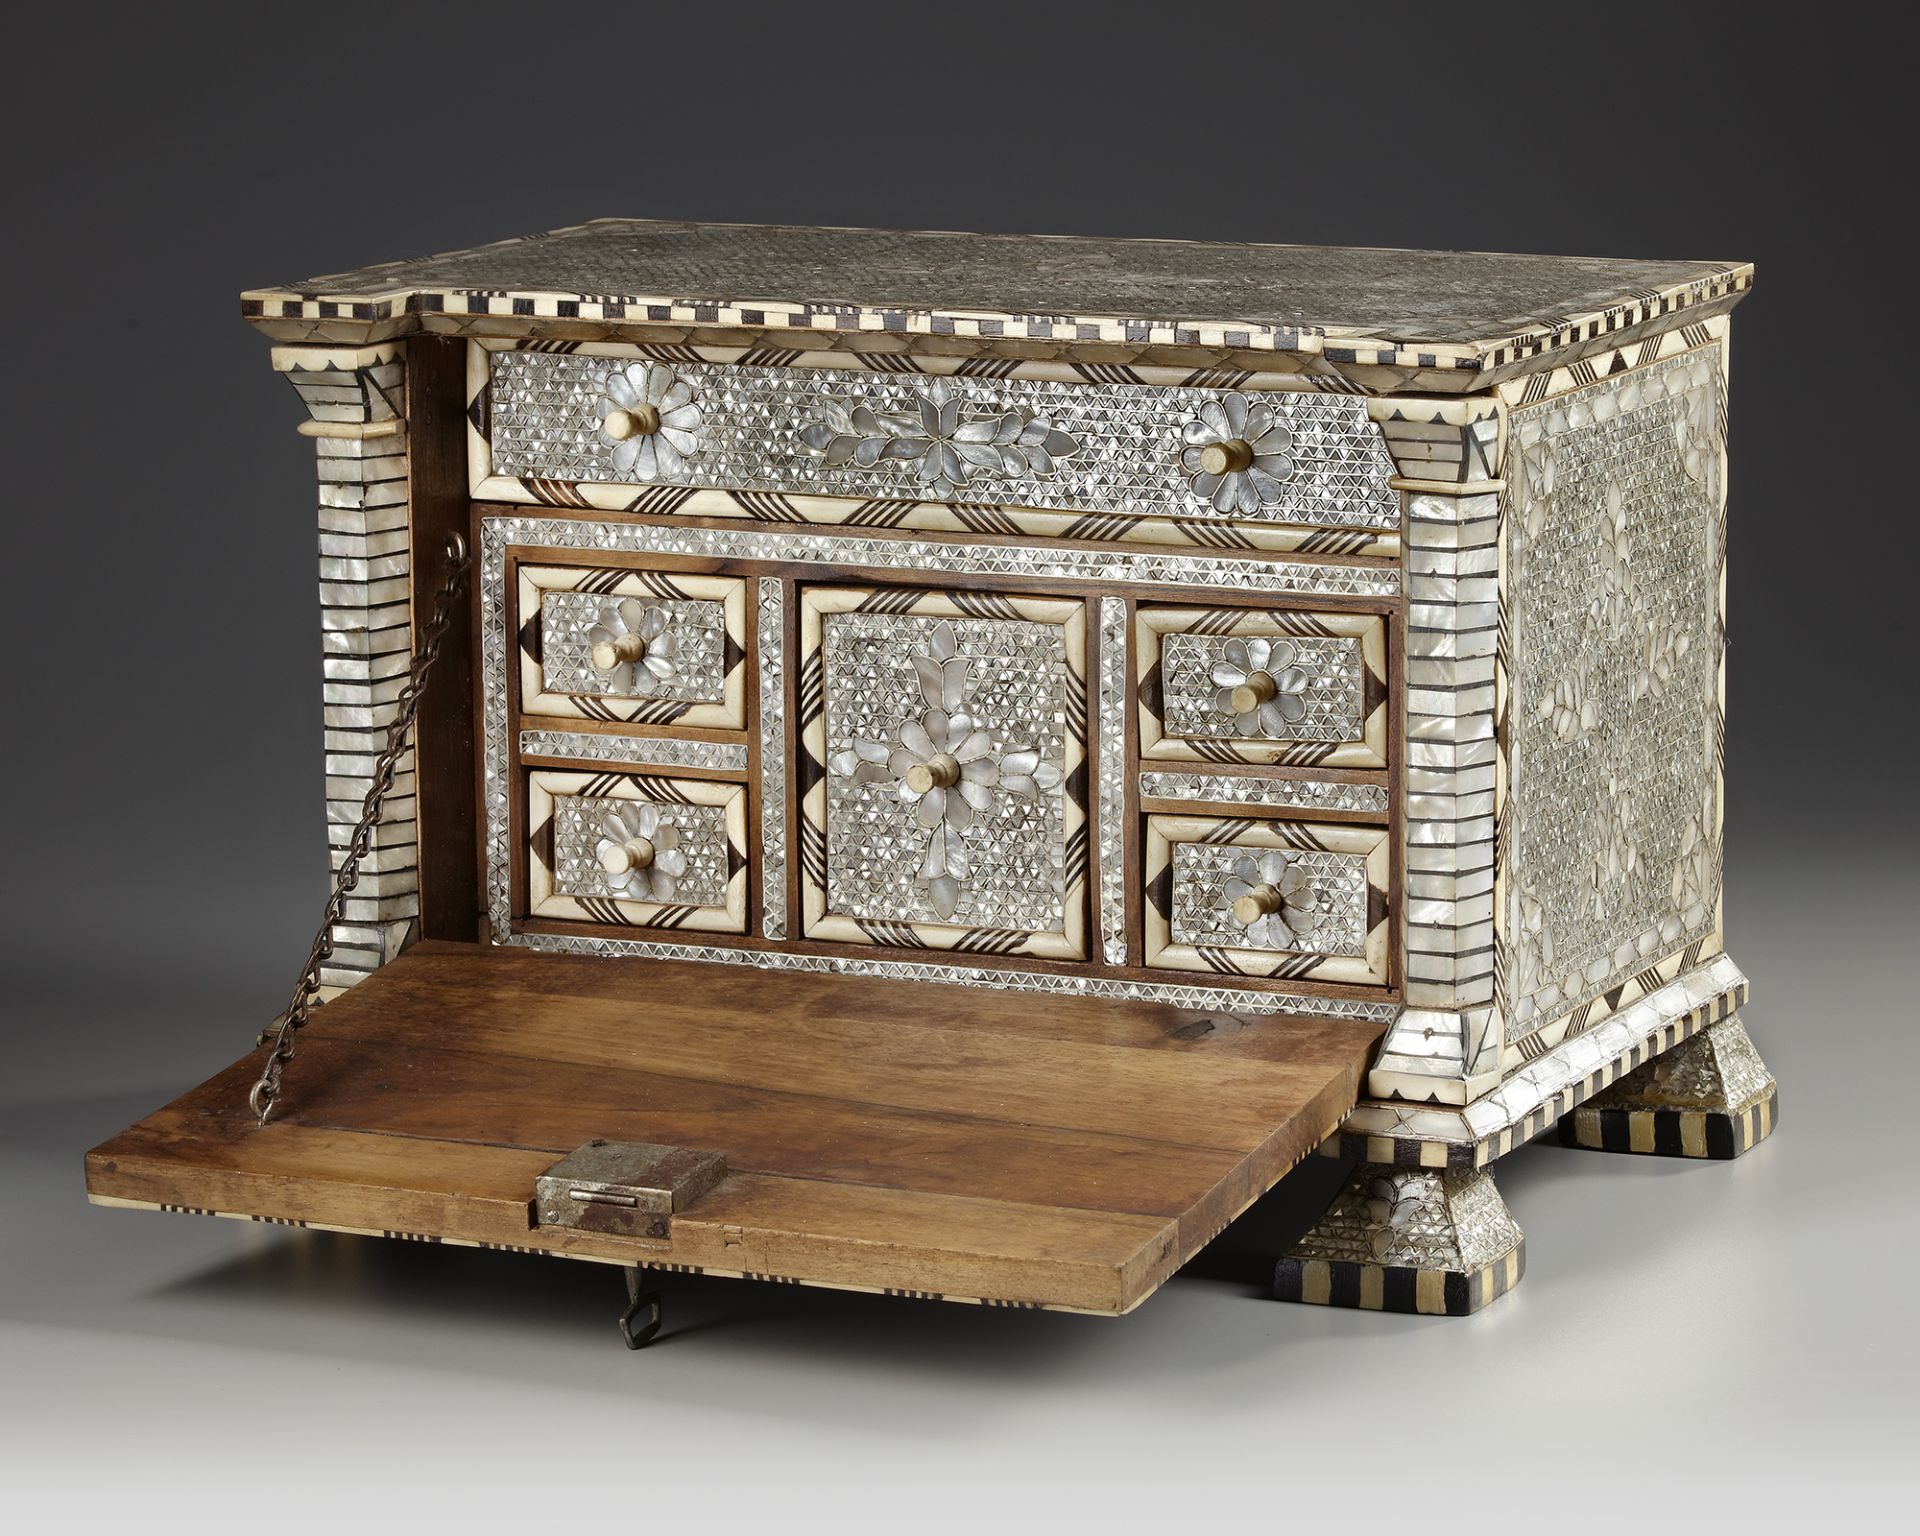 AN OTTOMAN MOTHER-OF-PEARL AND BONE INLAID CHEST, TURKEY, EARLY 20TH CENTURY